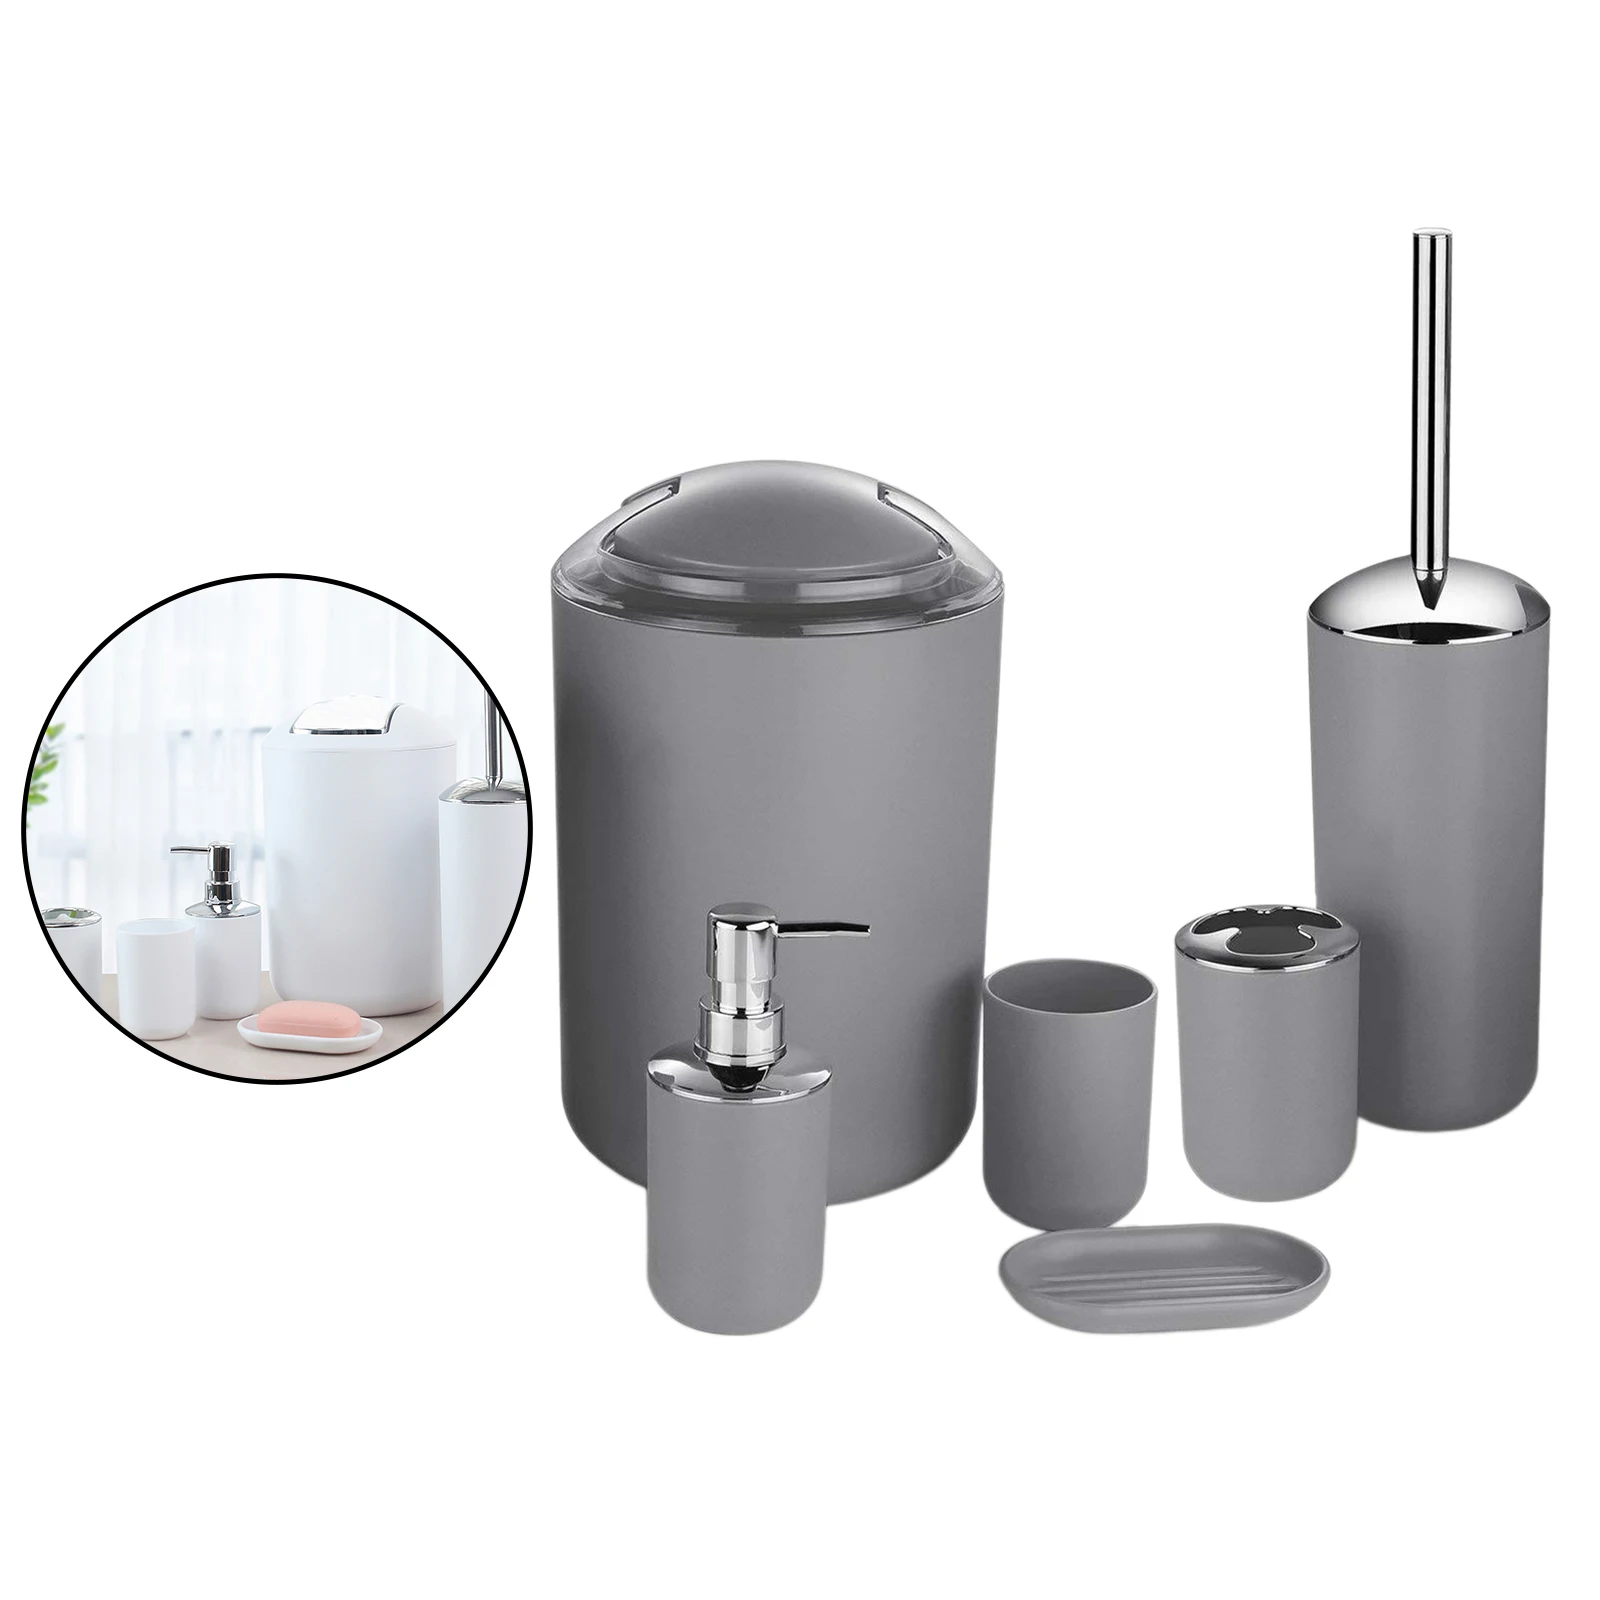 Bathroom Accessories Set,6 Pcs Gift Set Toothbrush Holder,Toothbrush Cup,Soap Dispenser,Soap Dish,Toilet Brush Holder,Trash Can